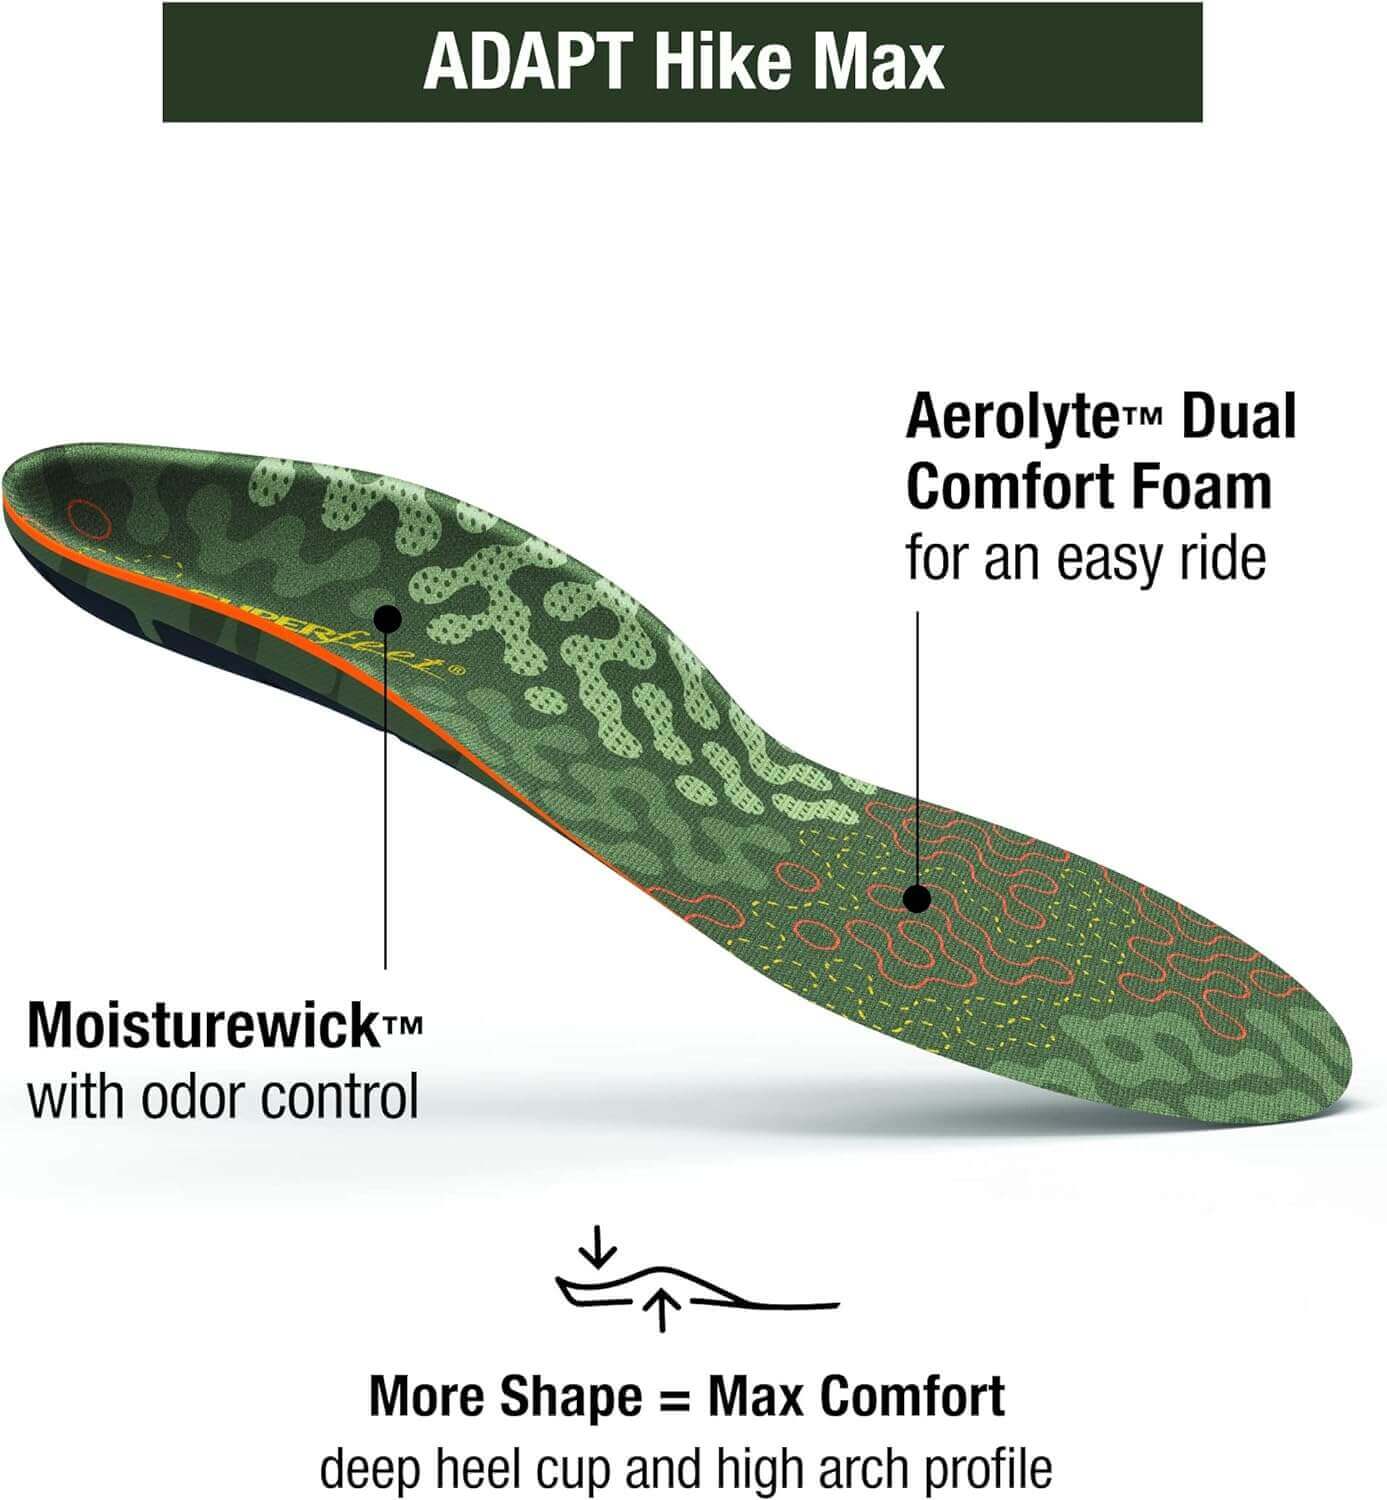 Shop The Latest >Superfeet Hike Cushion Insoles Arch Support Inserts for Hiking Boots > *Only $74.18*> From The Top Brand > *Superfeetl* > Shop Now and Get Free Shipping On Orders Over $45.00 >*Shop Earth Foot*